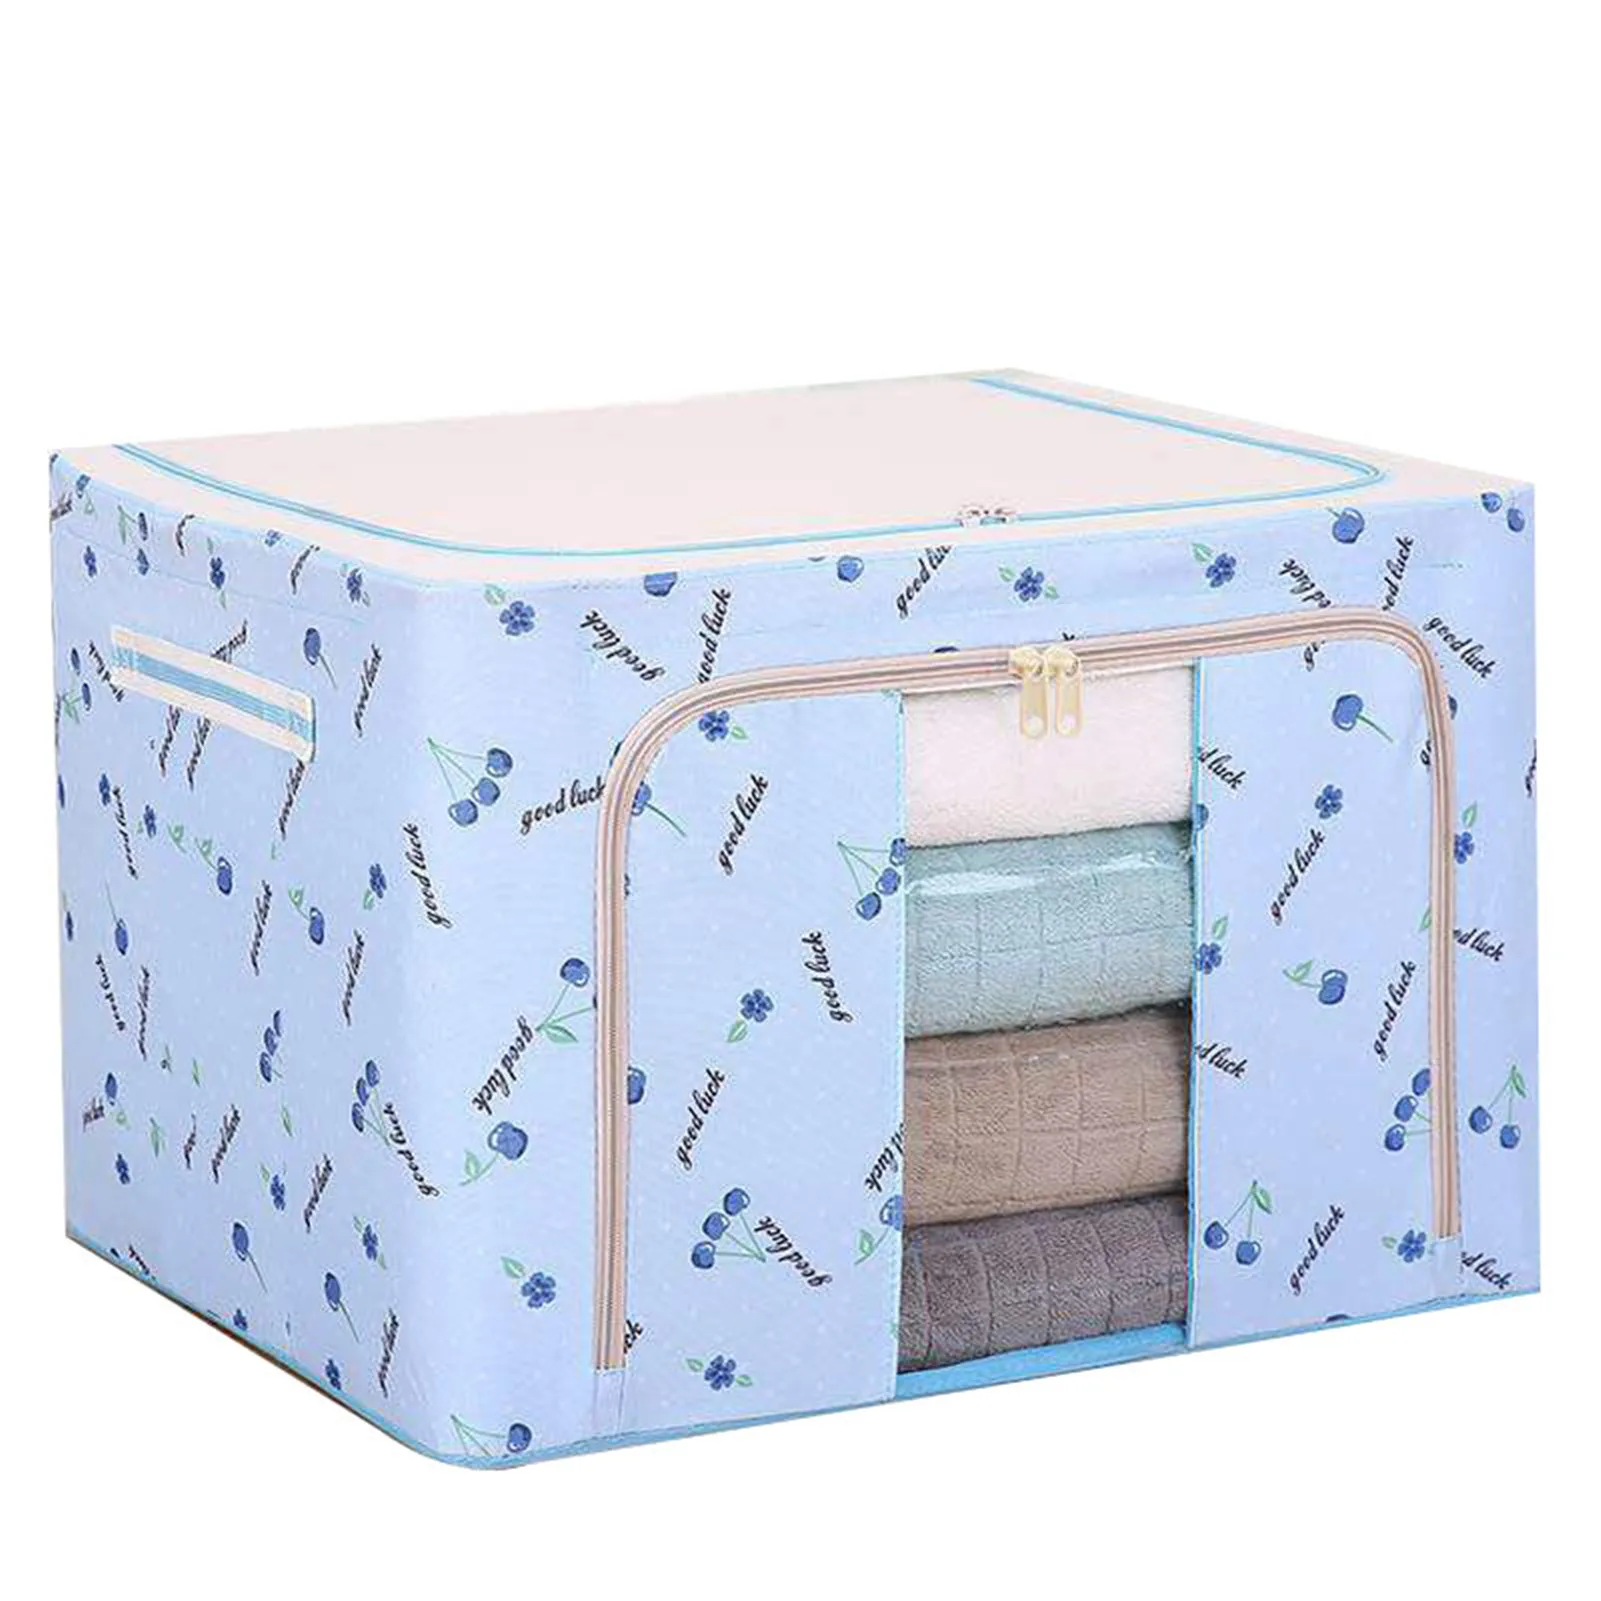 

Oxford Cloth Steel Frame Storage Box for Clothes Bed Sheets Blanket Pillow Shoe Holder Container Organizer FOU99